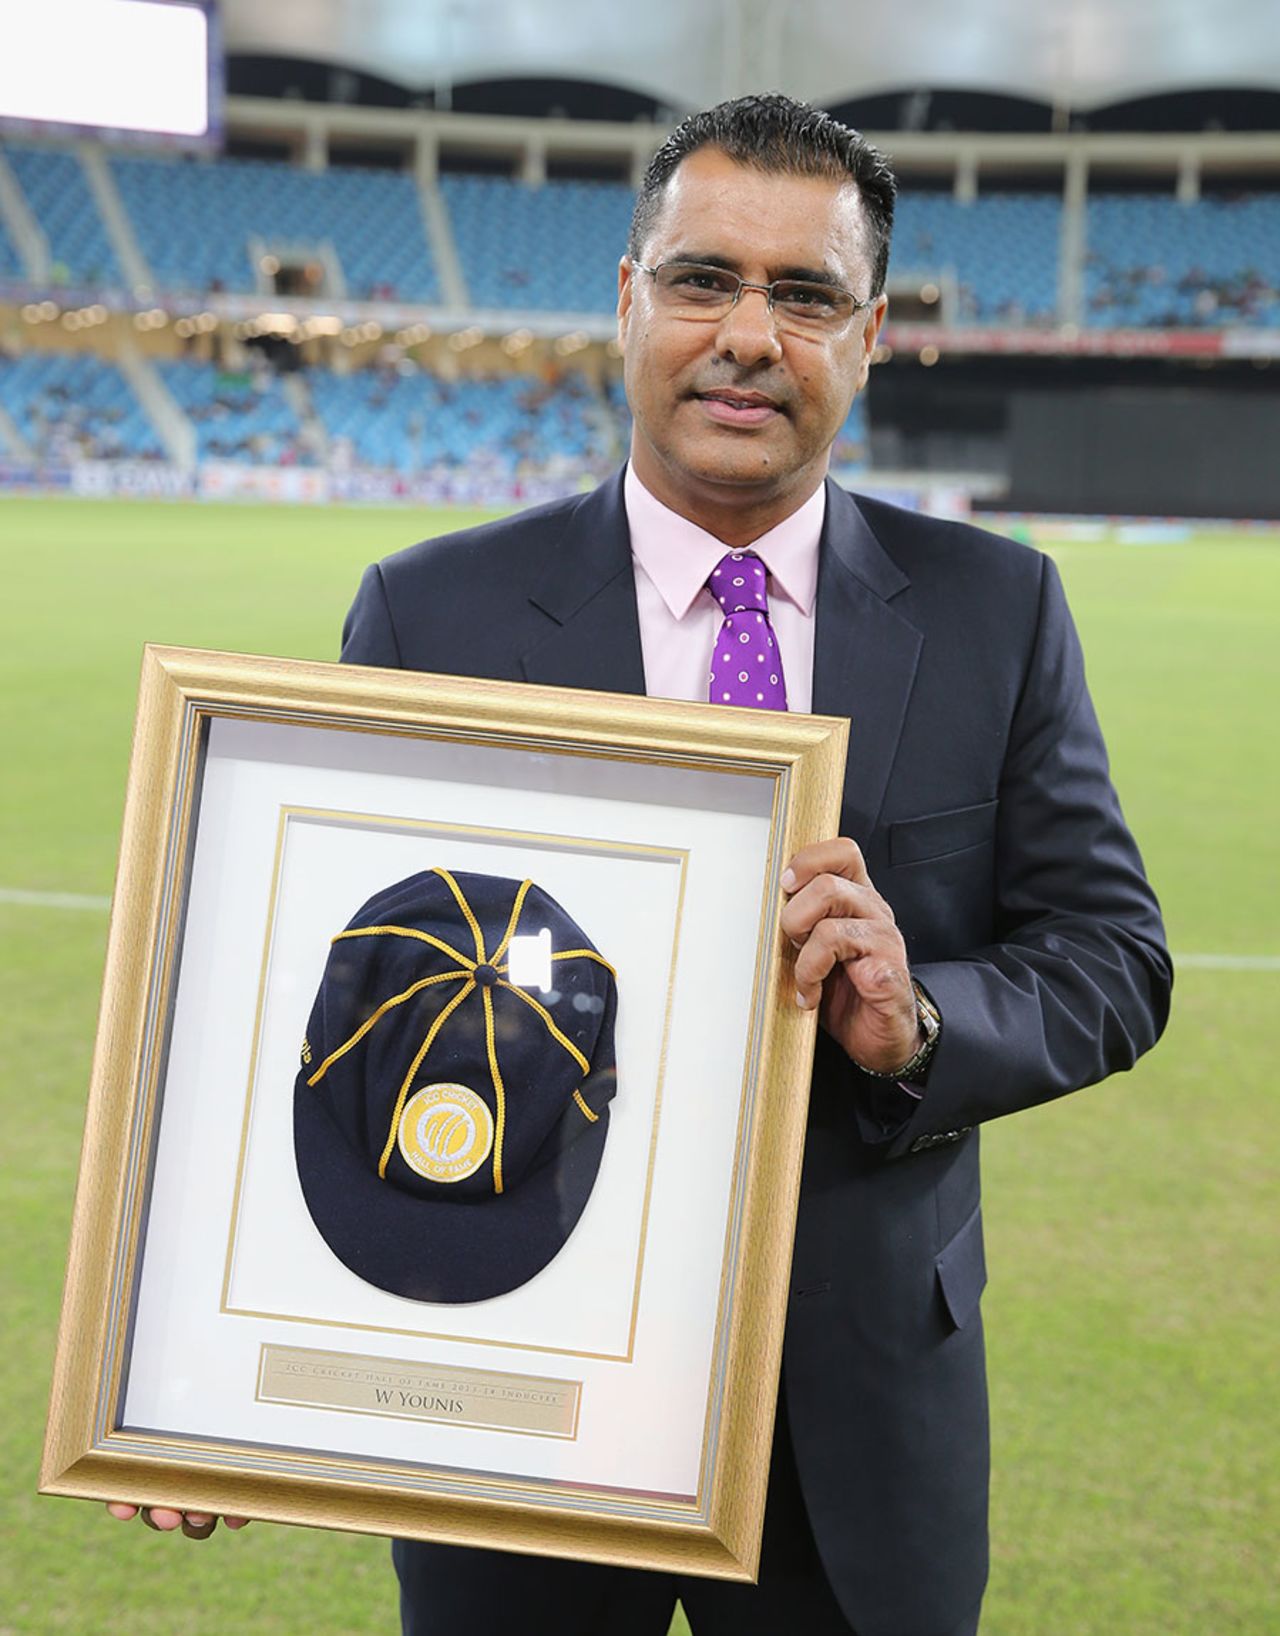 Waqar Younis was inducted into the ICC Cricket Hall of Fame, Pakistan v Sri Lanka, 1st T20I, Dubai, December 11, 2013